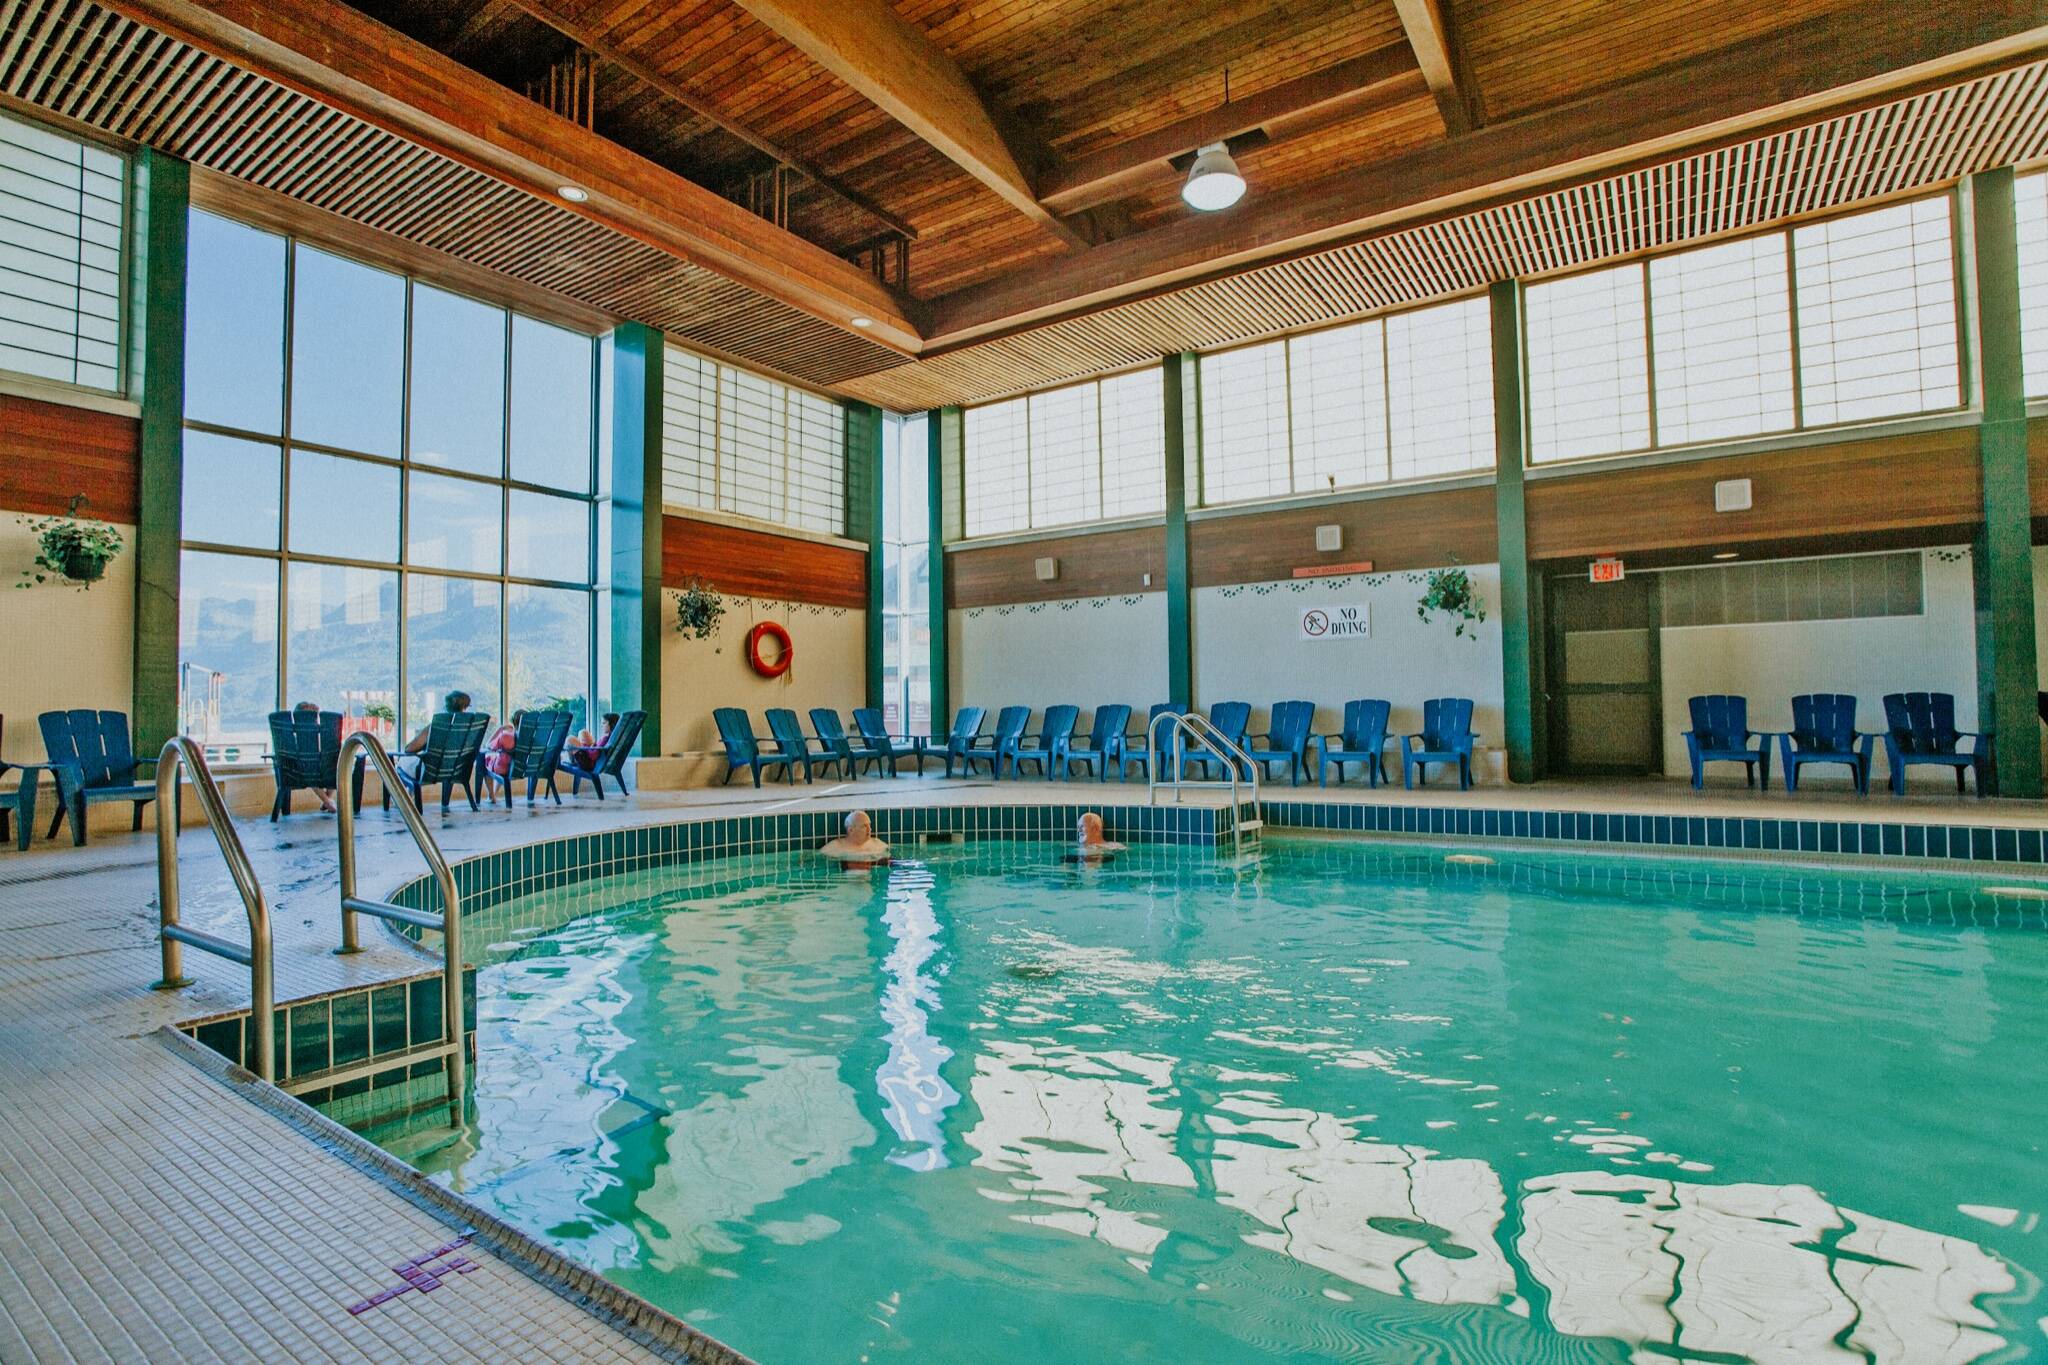 The Harrison Hot Springs Public Mineral Pool is closed indefinitely once more, effective June 17. (Contributed Photo/Tourism Harrison)